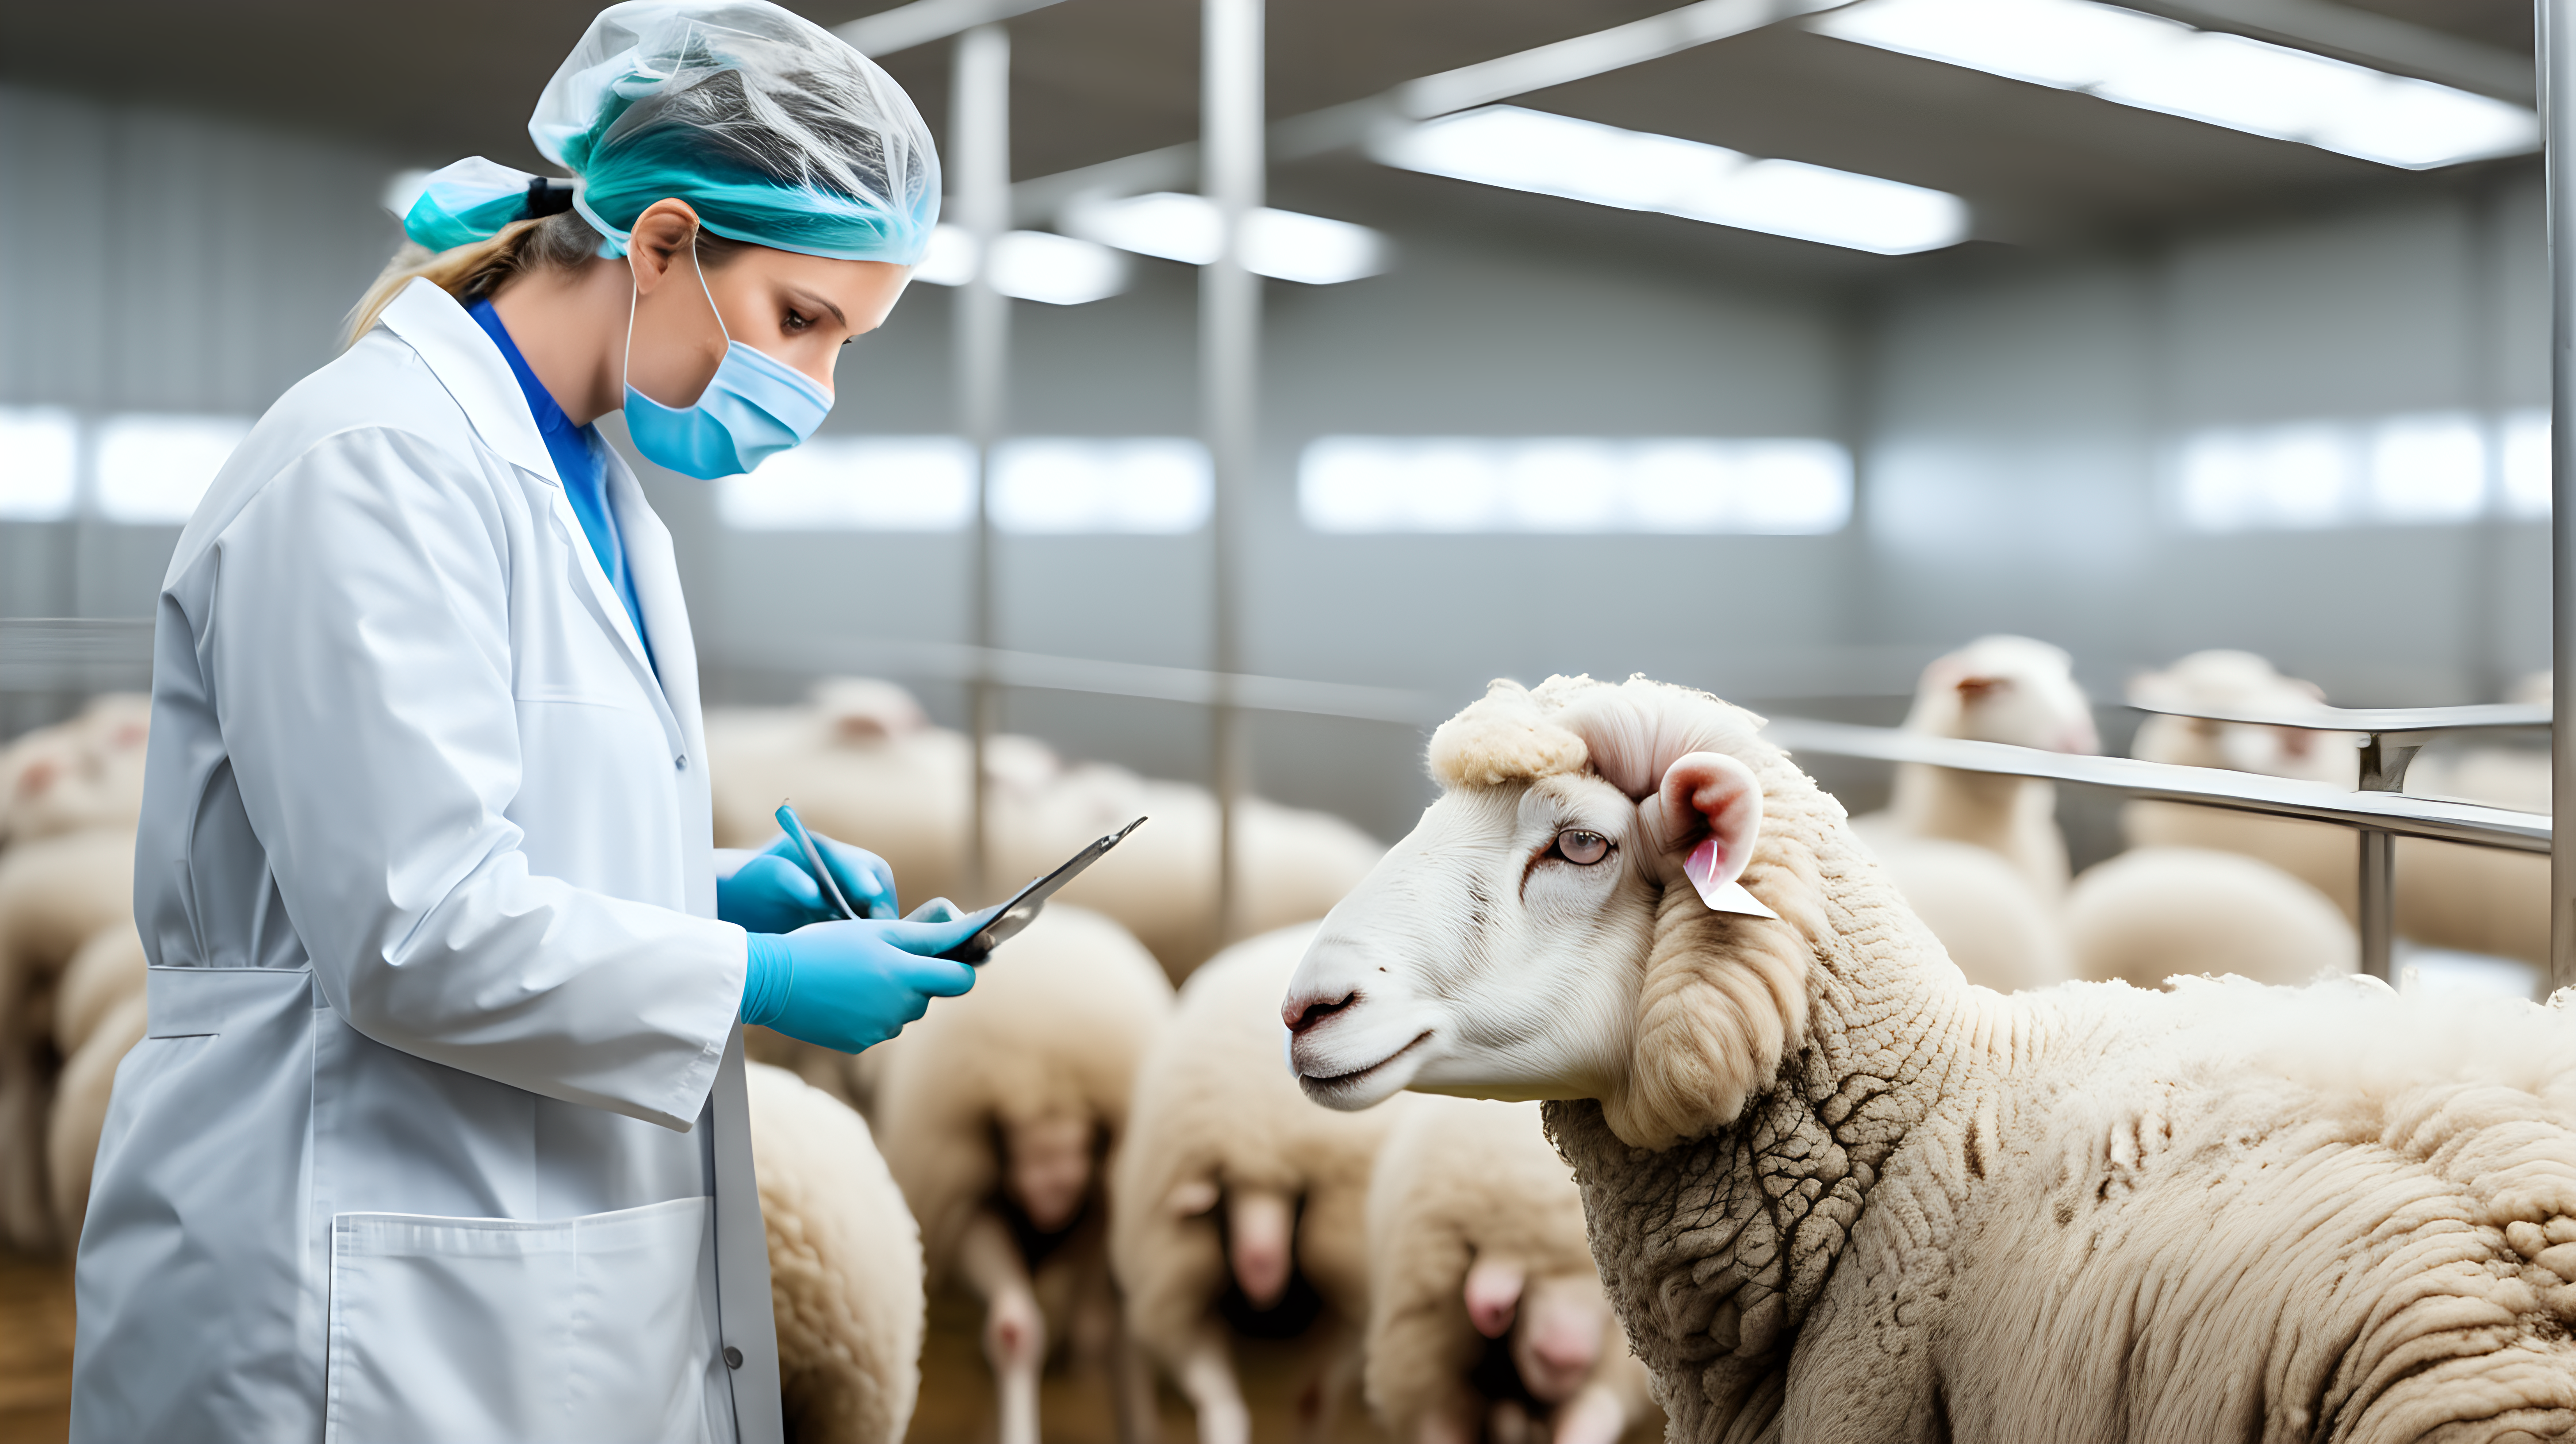 Veterinarian health check a sheep in an indoor